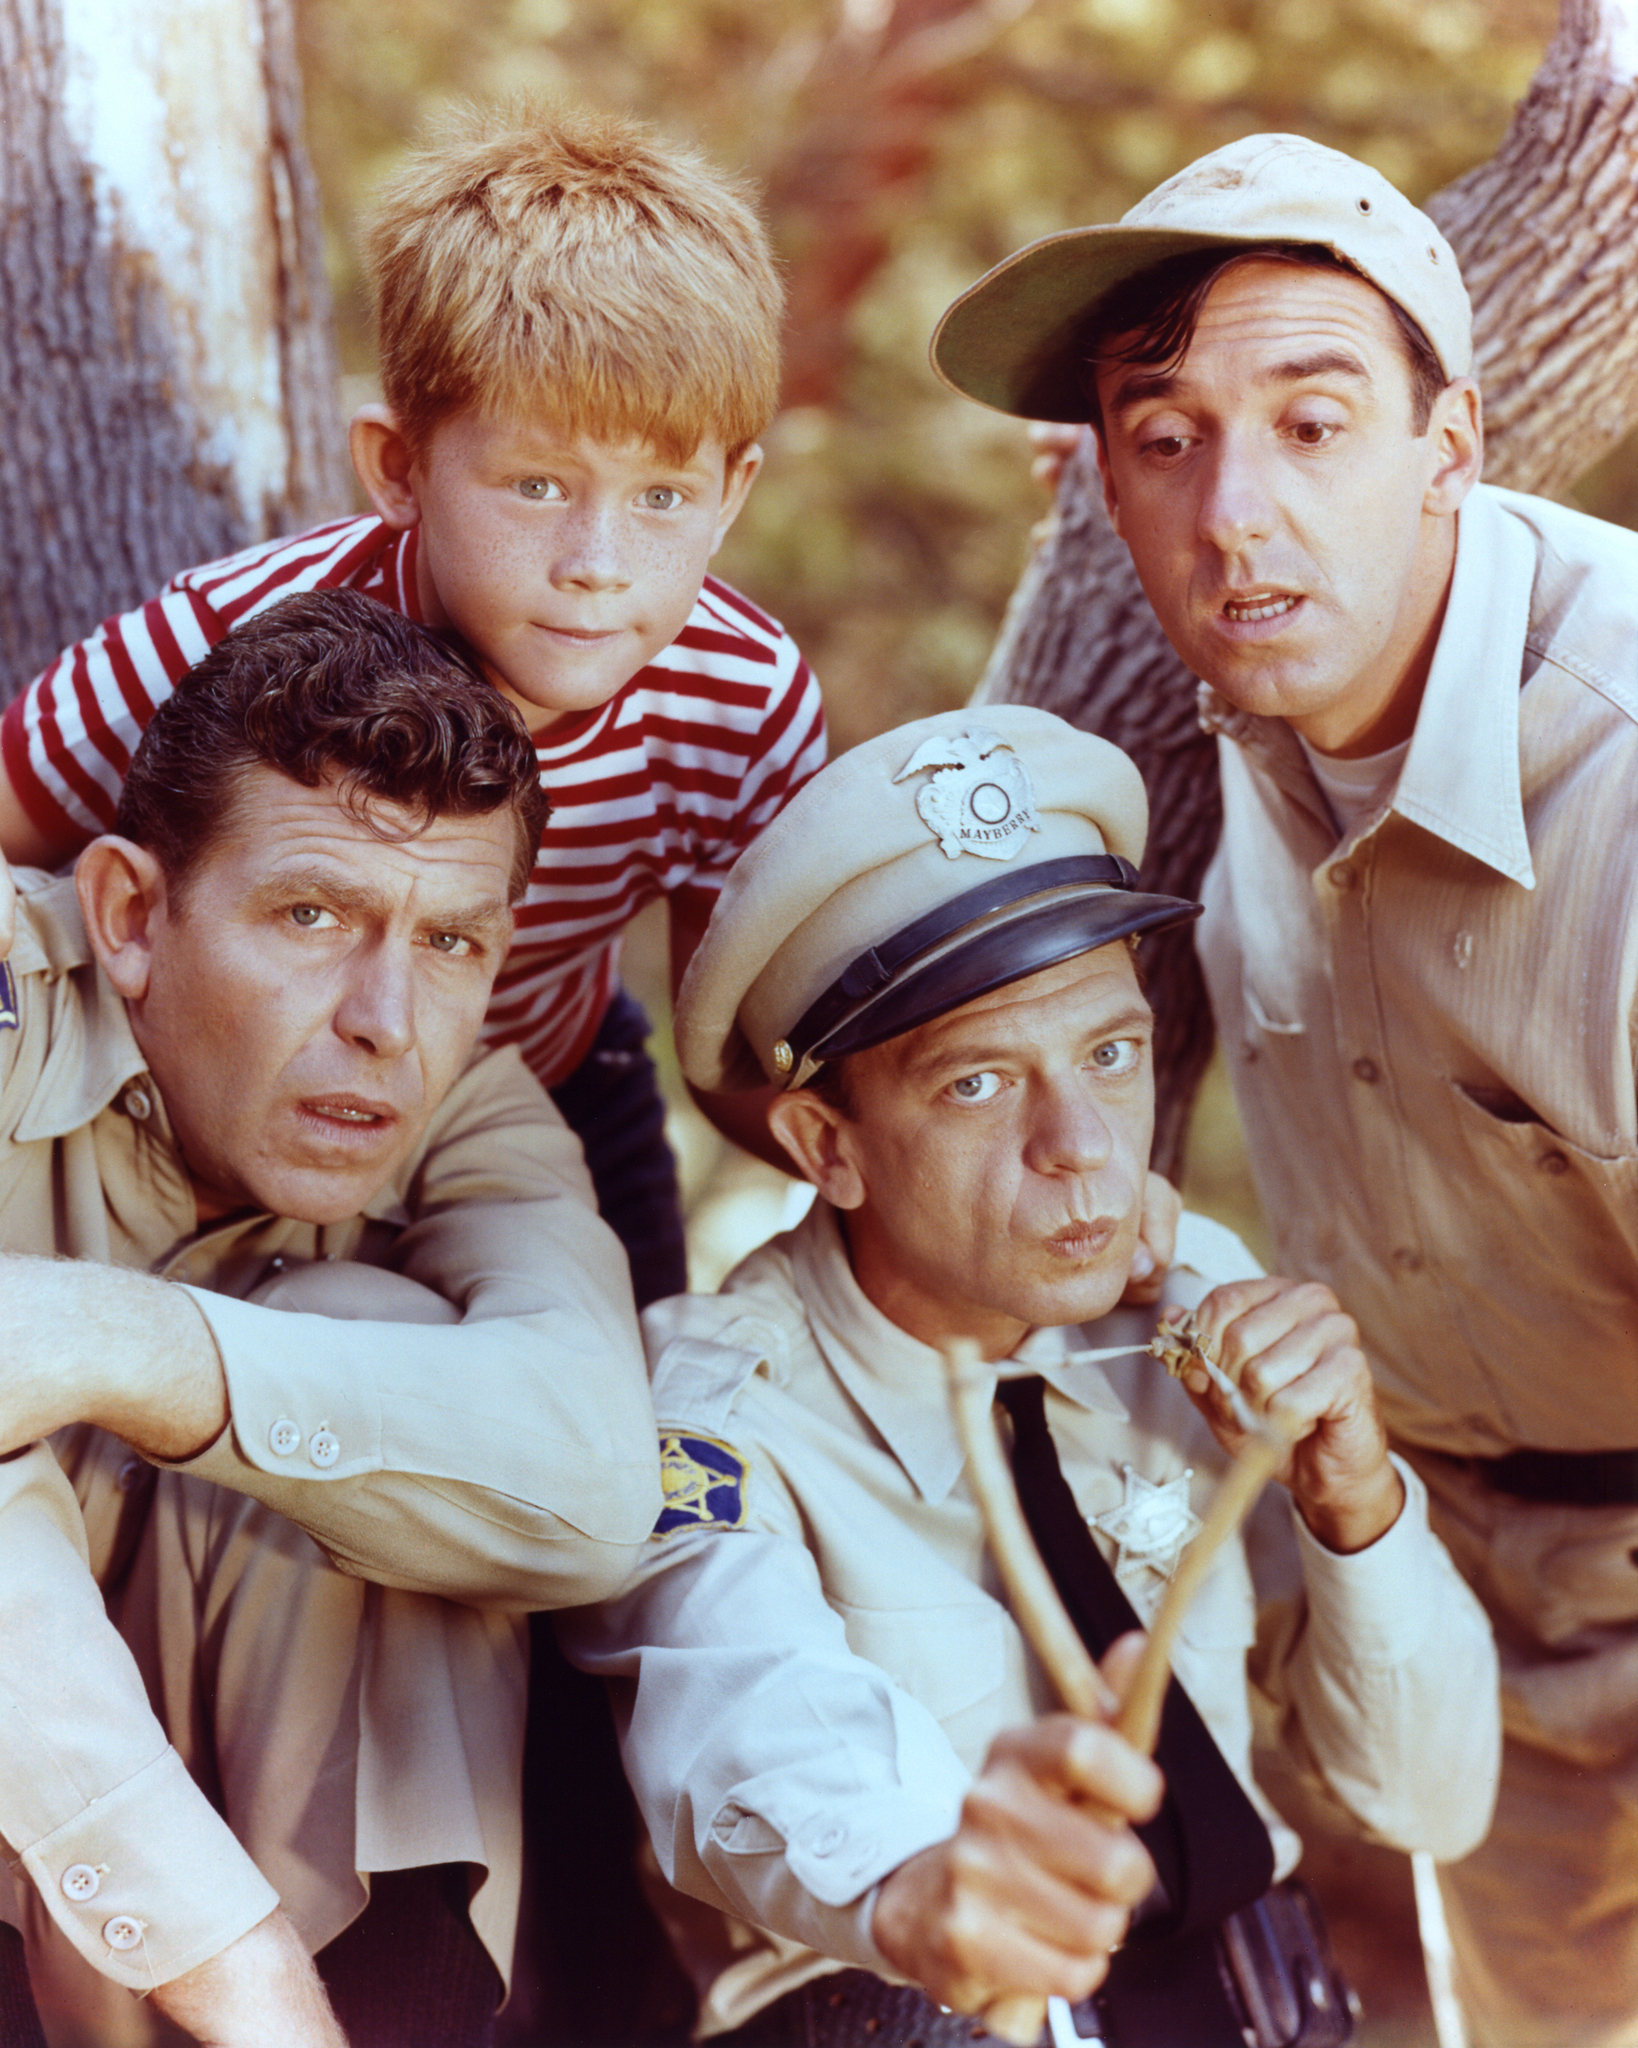 Ron Howard, Jim Nabors, Andy Griffith and Don Knotts at event of The Andy Griffith Show (1960)